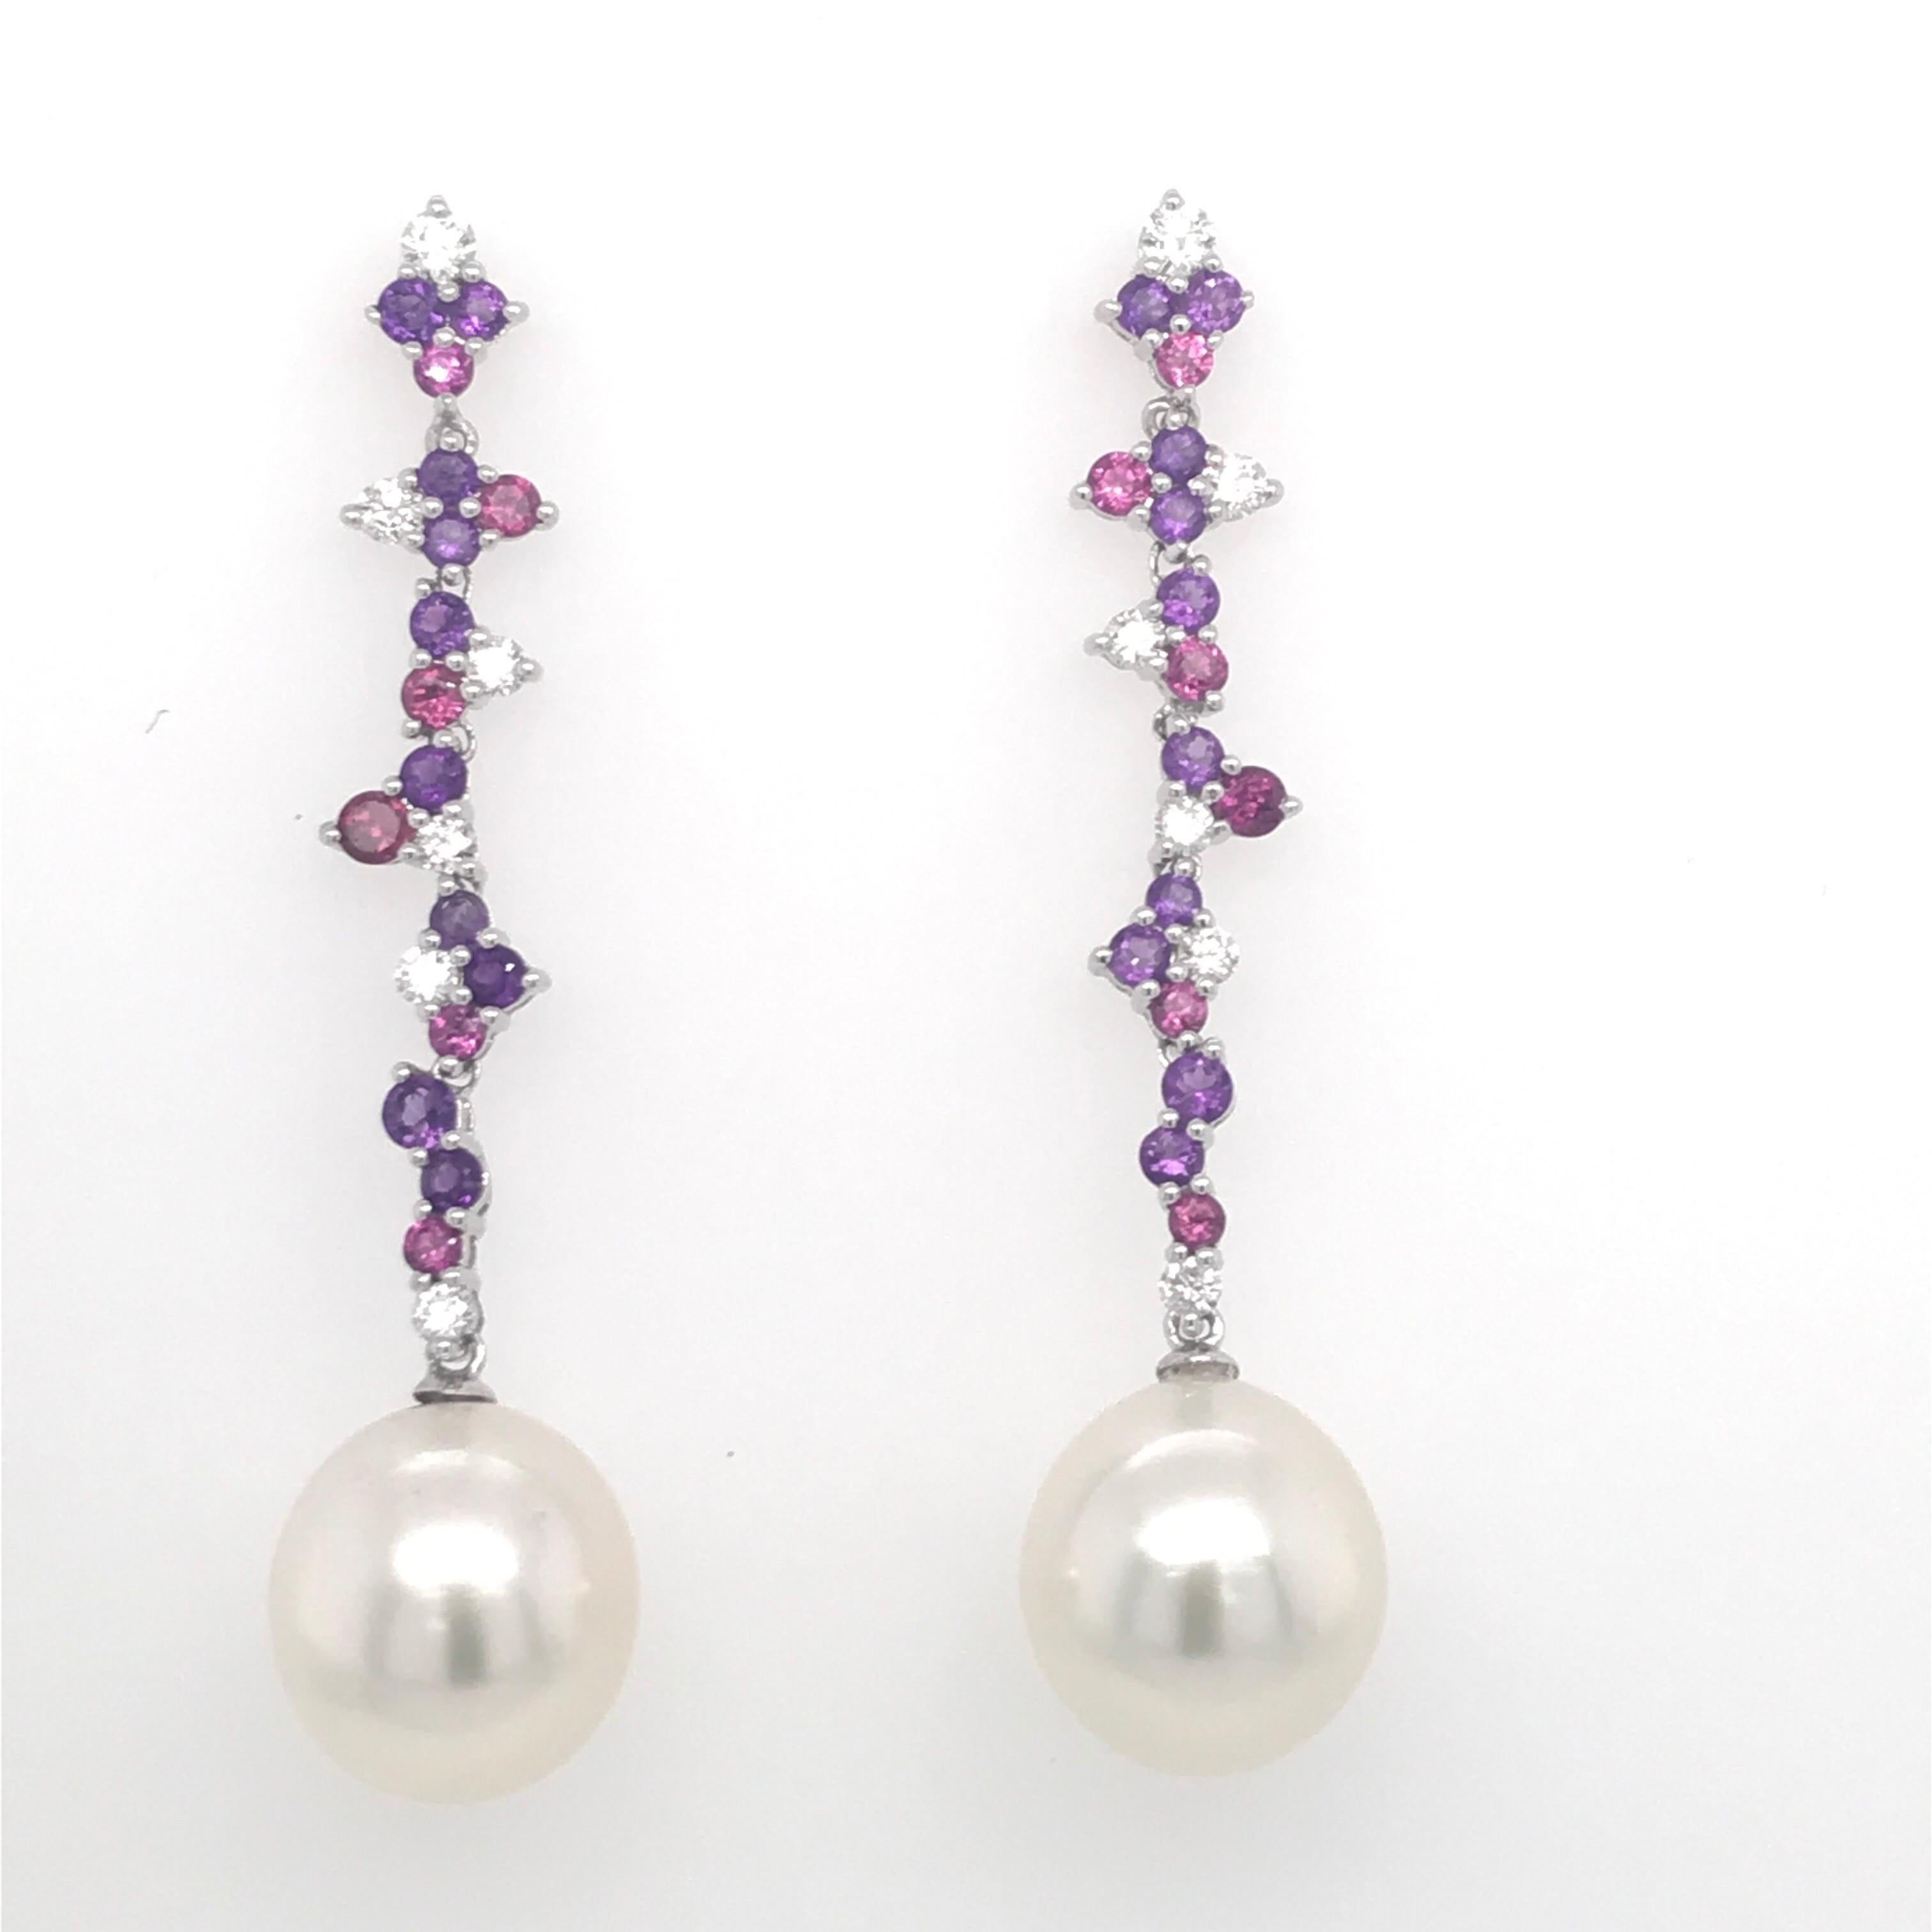 18K White Gold drop earrings featuring two pearls measuring 12-13 mm with diamonds, 0.50 carats, pink and purple amethyst & rhodonites weighing 1.60 carats. 